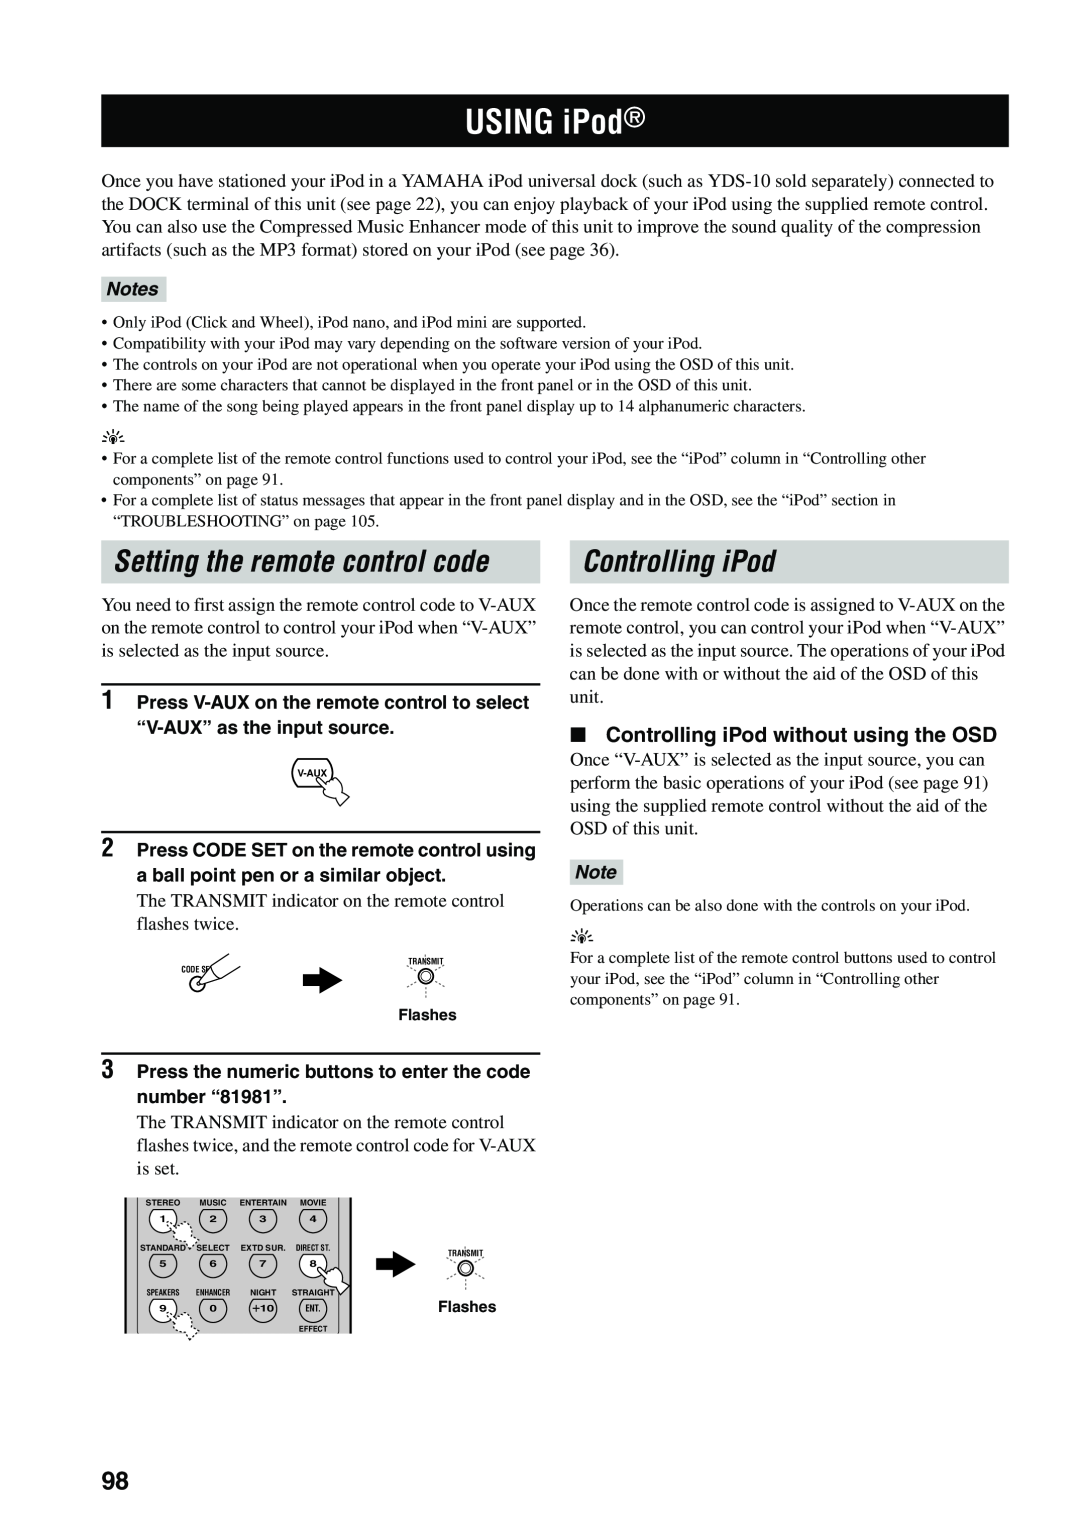 Yamaha RX-V559 owner manual USING iPod, Controlling iPod without using the OSD, Setting the remote control code, Notes 